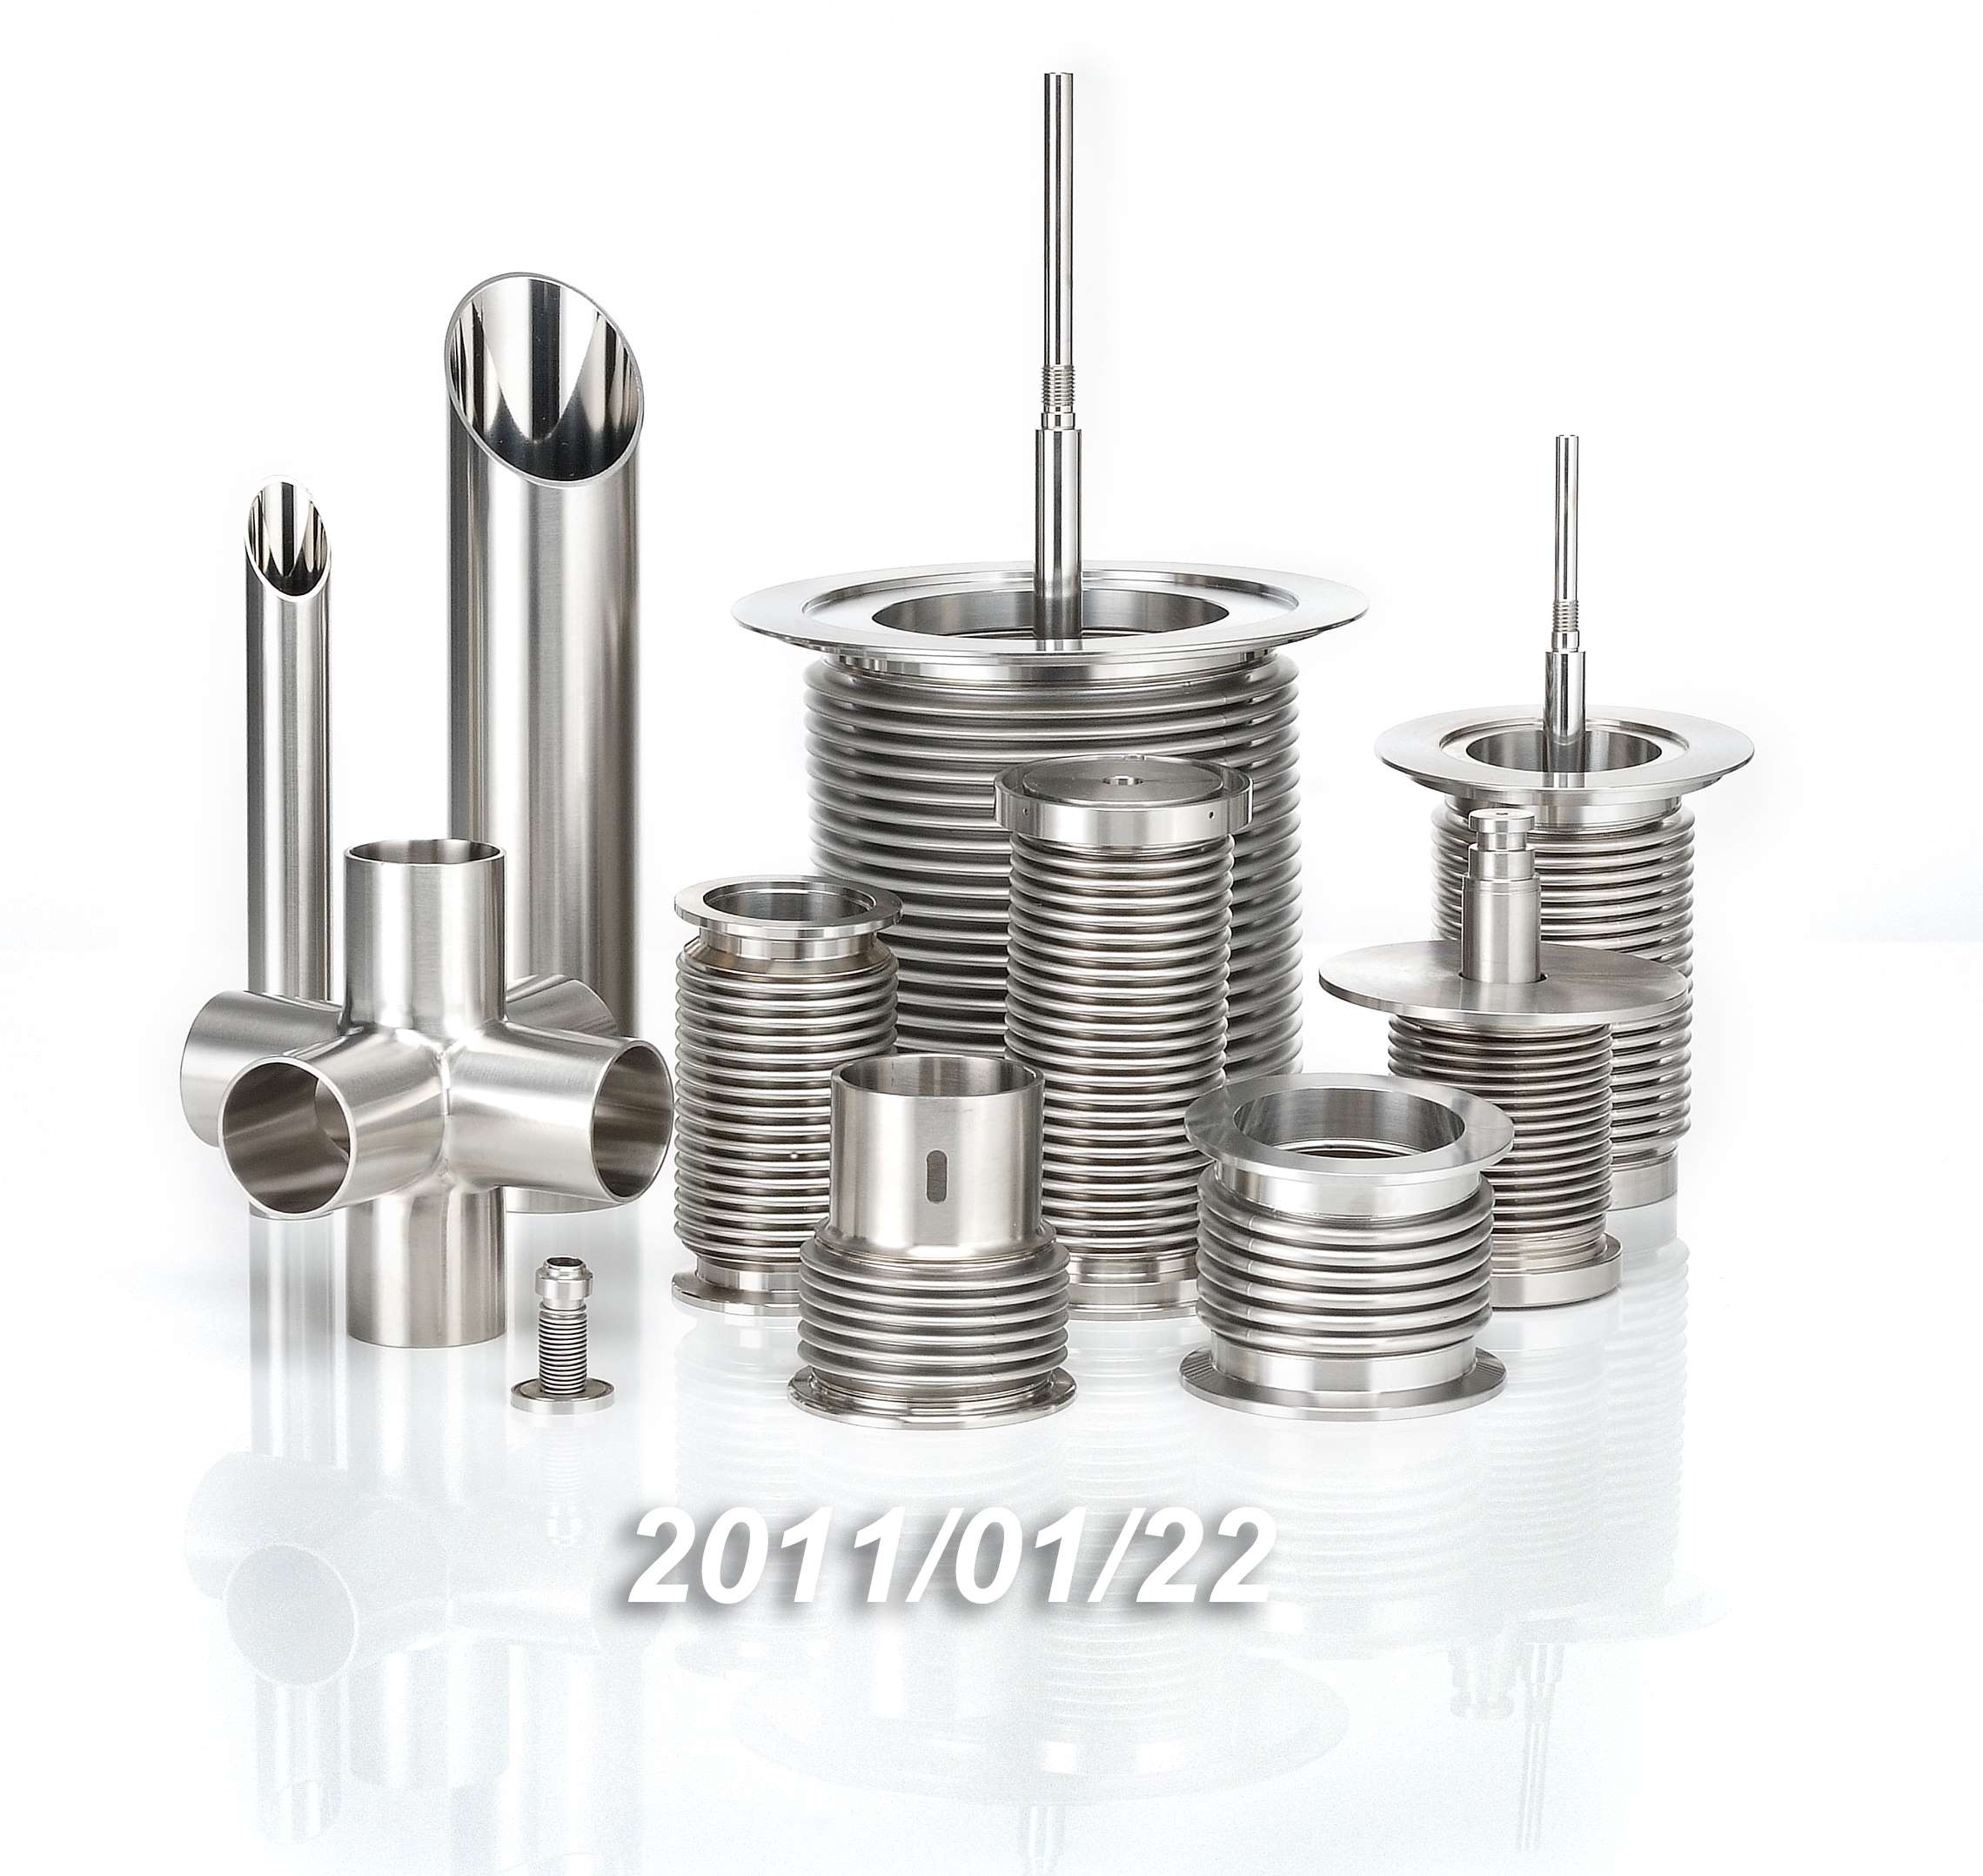 Qualified Coupling, Shaft Manufacturer and Supplier